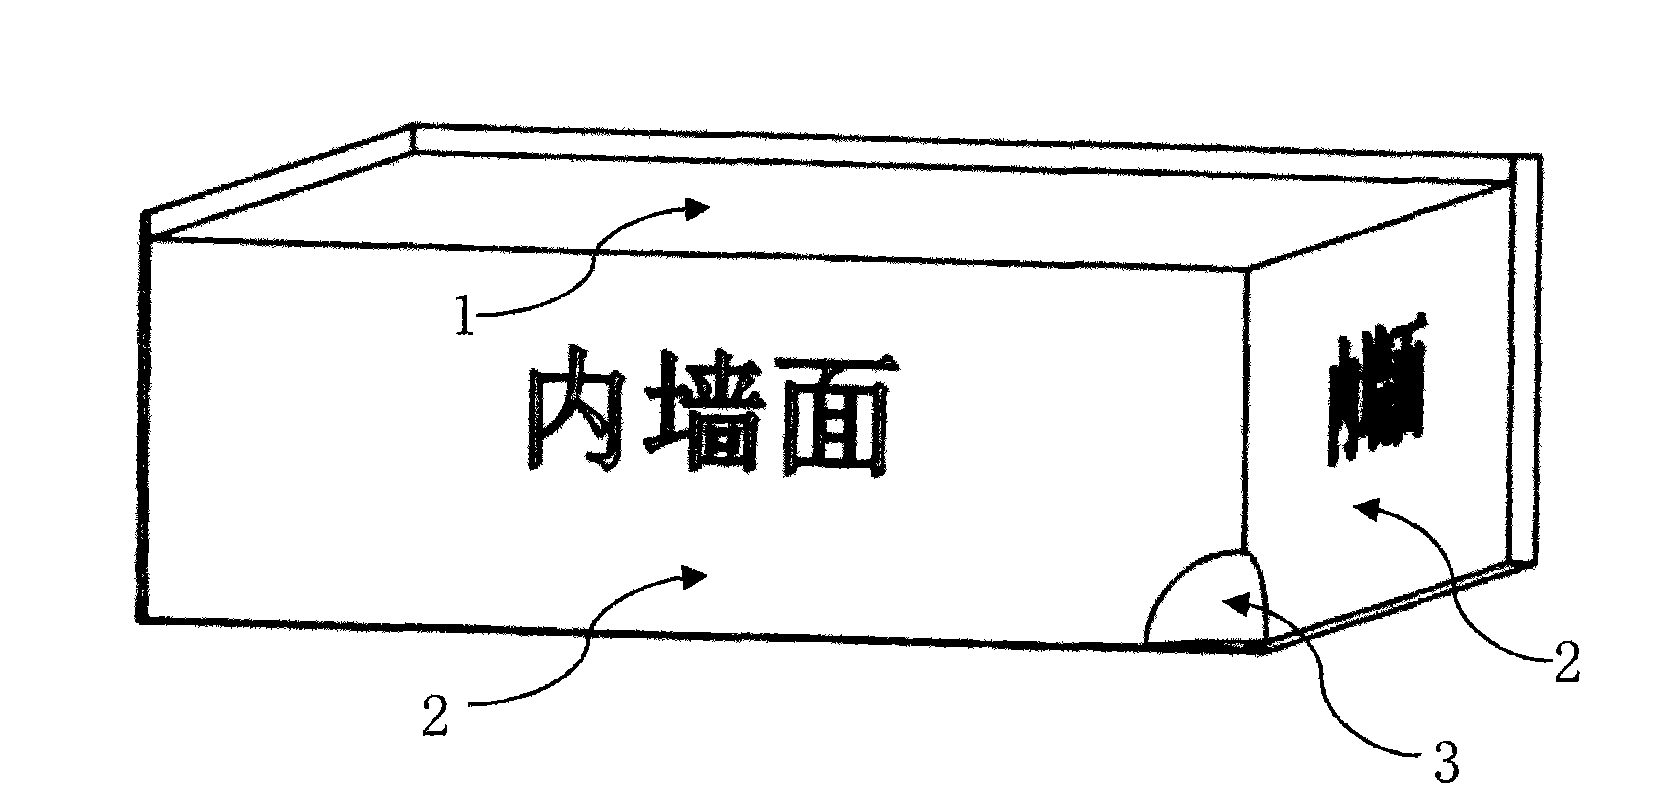 Cleaning, repairing and transporting equipment capable of walking on roofs in rail transfer mode